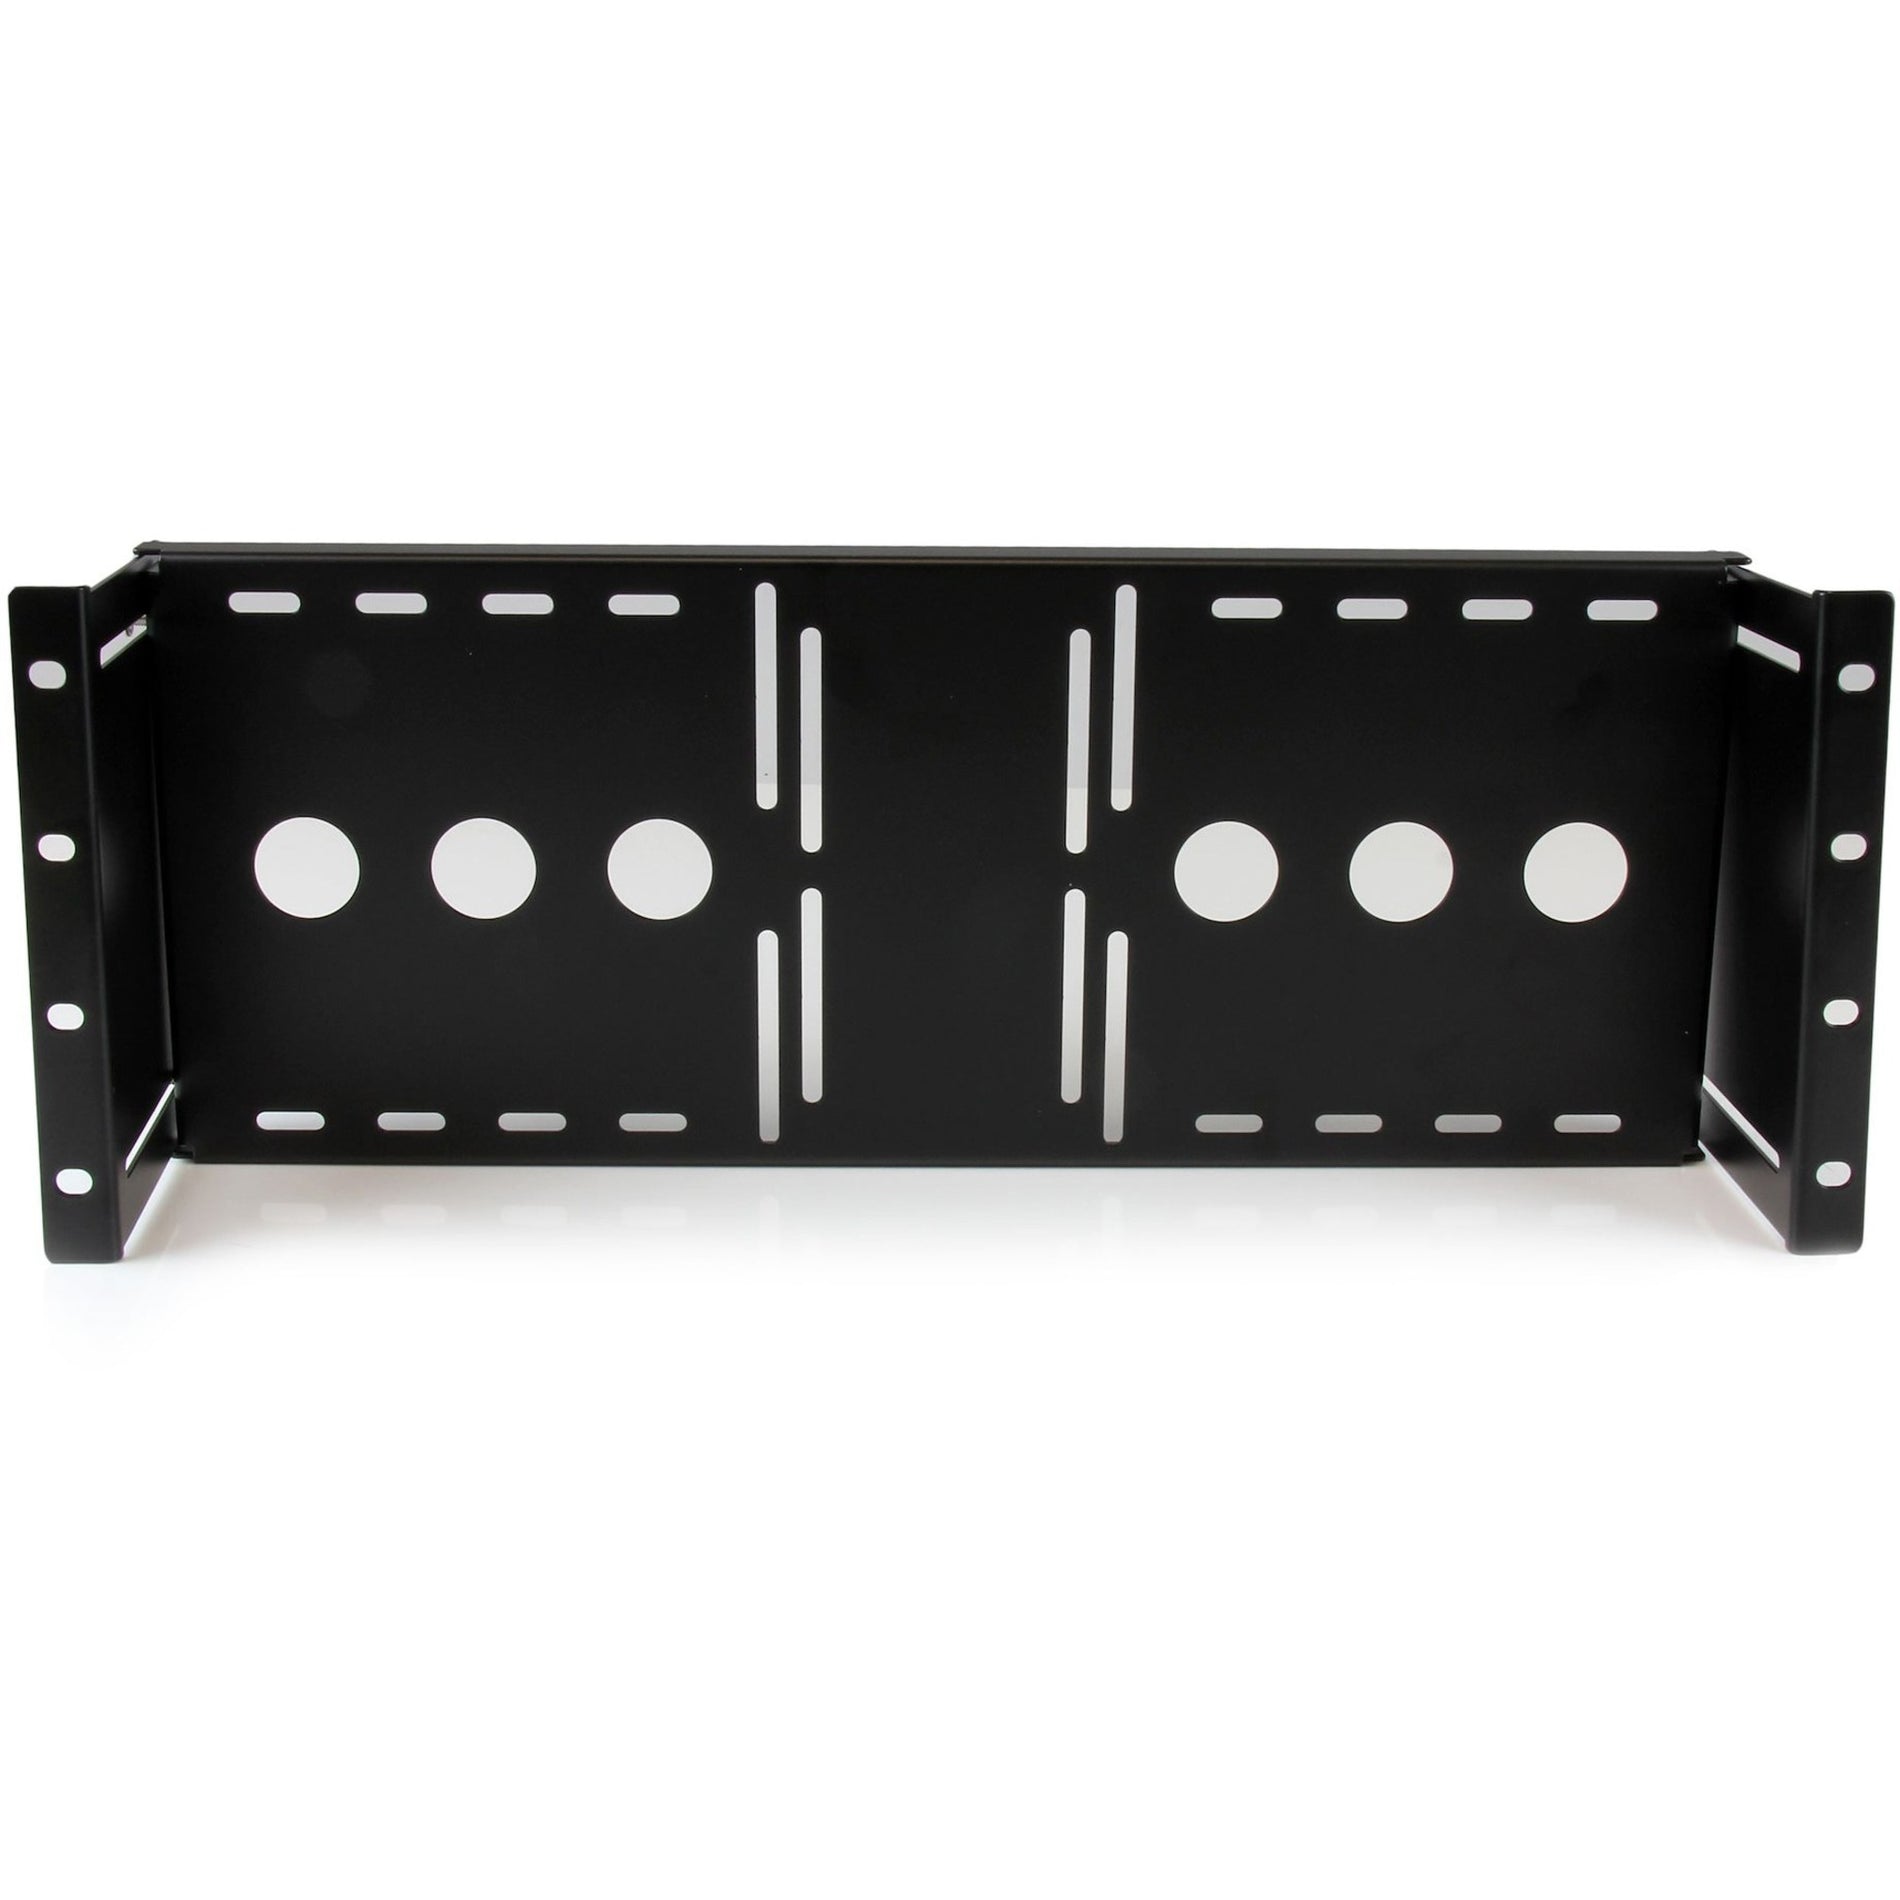 StarTech.com RKLCDBK Universal VESA LCD Monitor Mounting Bracket for 19in Rack or Cabinet, Durable and Versatile Solution